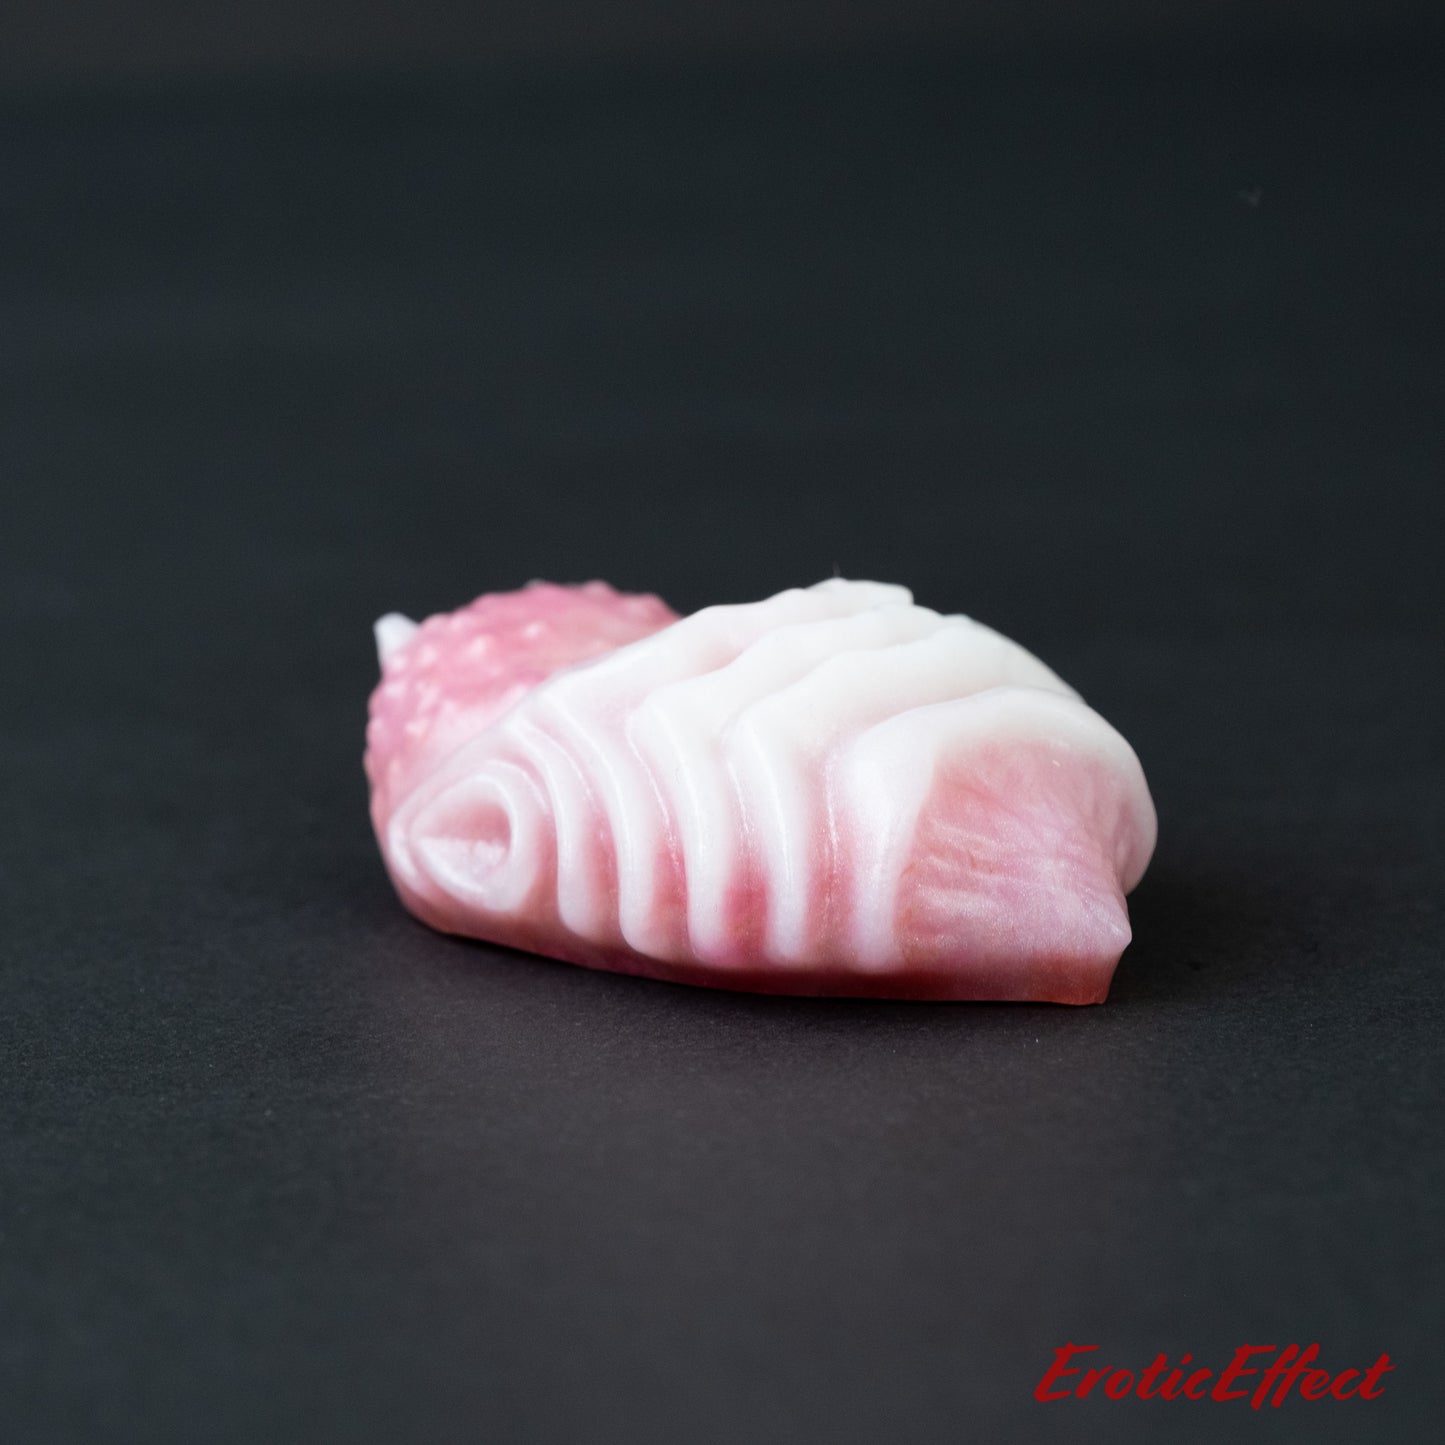 Edgar Silicone Grindable/Squishy - Glow White/Pink/Red Shimmer - Medium Firmness